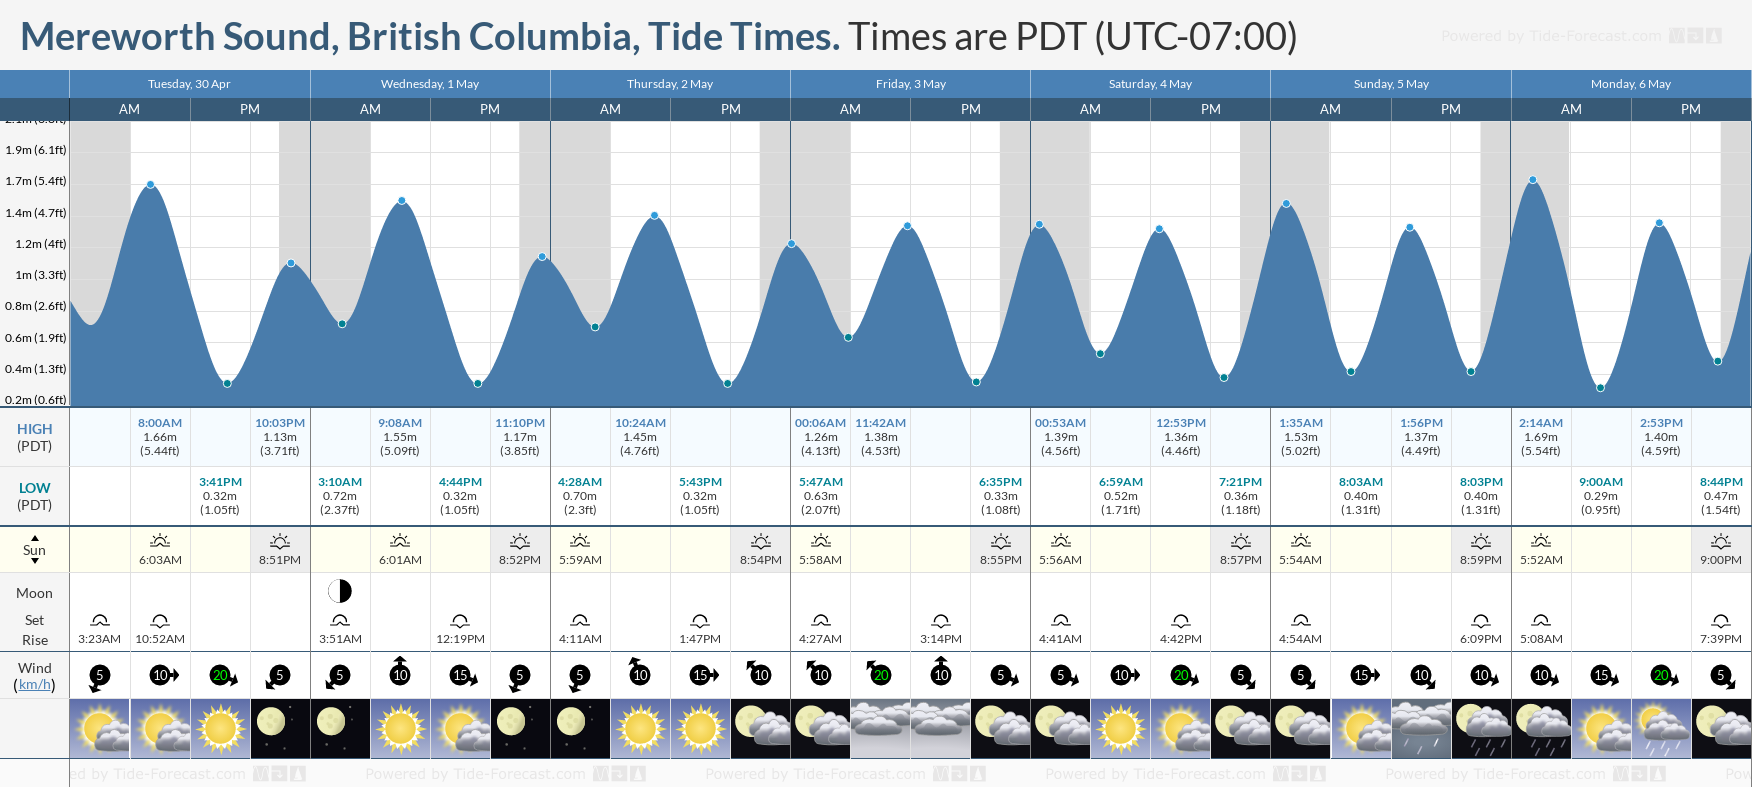 Mereworth Sound, British Columbia Tide Chart including high and low tide tide times for the next 7 days